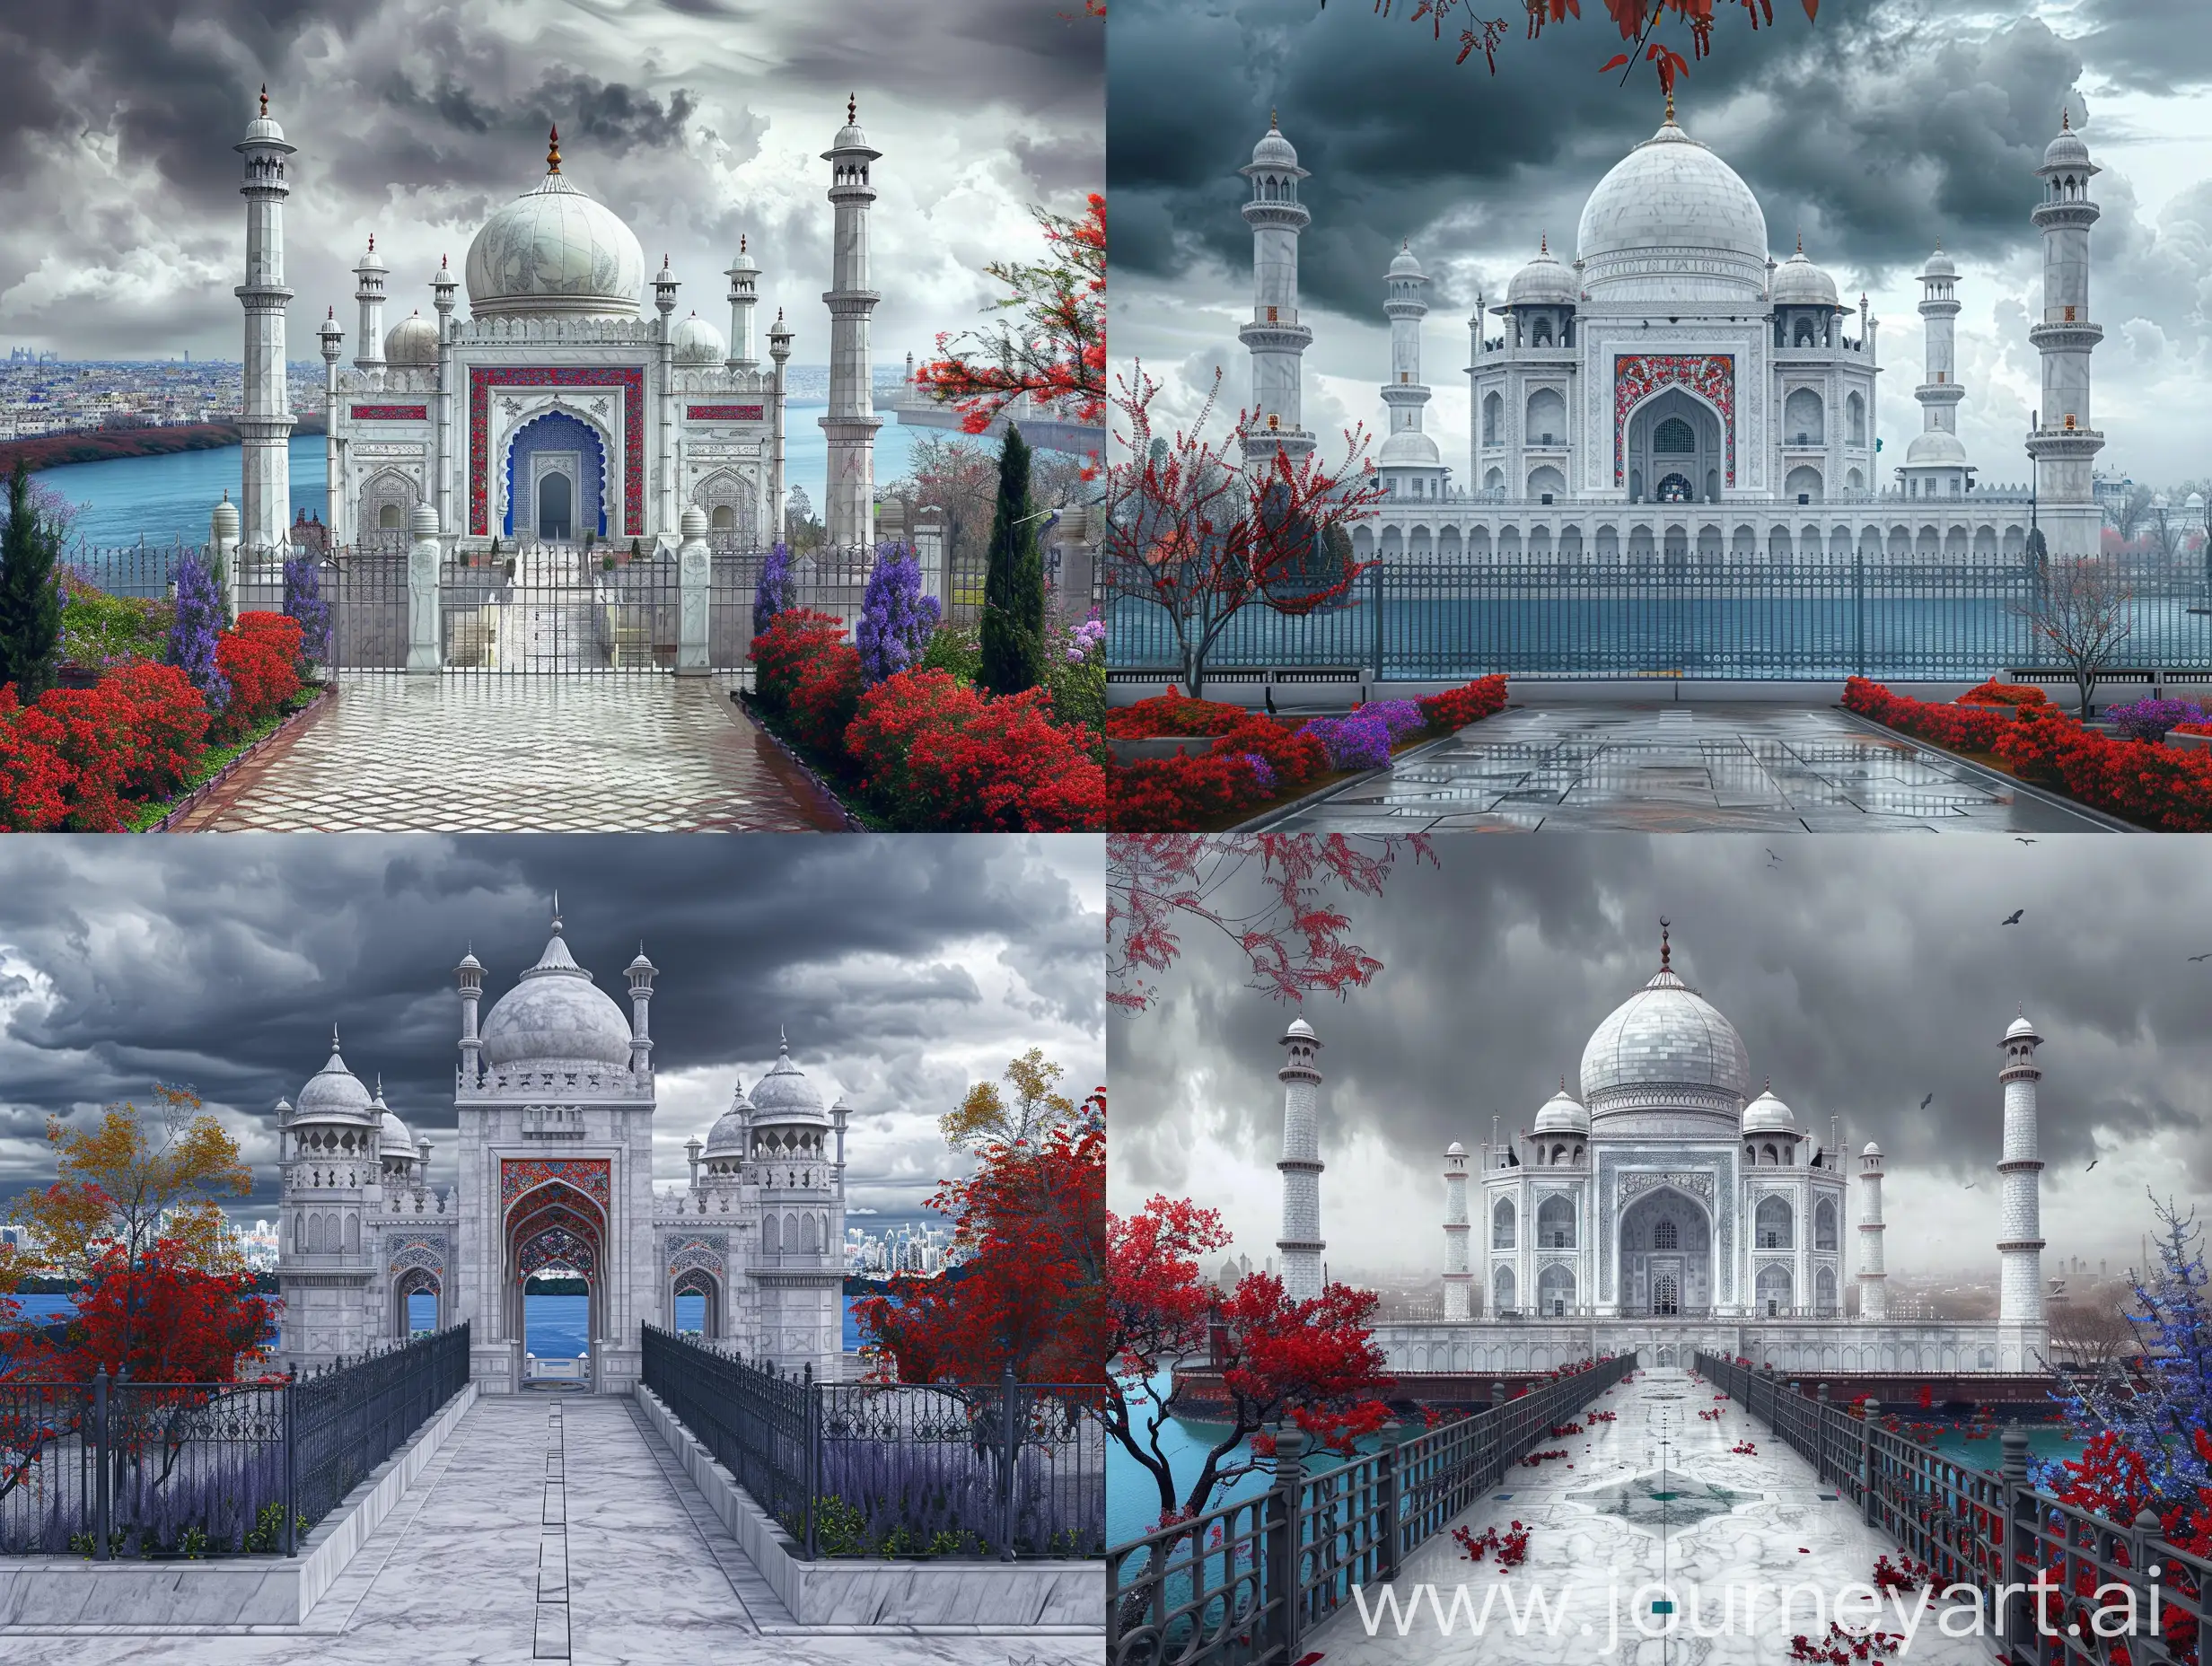 A beautiful white marbled mughal castle mosque having red blue Pietra dura decorations on exterior facades, in a city of white marbled mughal castles, the city lies beyond a blue river, fenced, dark gray cloudy weather, lavender red flowers and trees, straight on front view perspective --sref https://cdn.discordapp.com/attachments/1213041174428782623/1223222044104069191/IMG_20240326_220808.png?ex=664d248d&is=664bd30d&hm=d1fe2bb02f71536d0a4ef8a63d5af0b5c507c4372e360df8f4f782bf65e181c7& --sw 1000